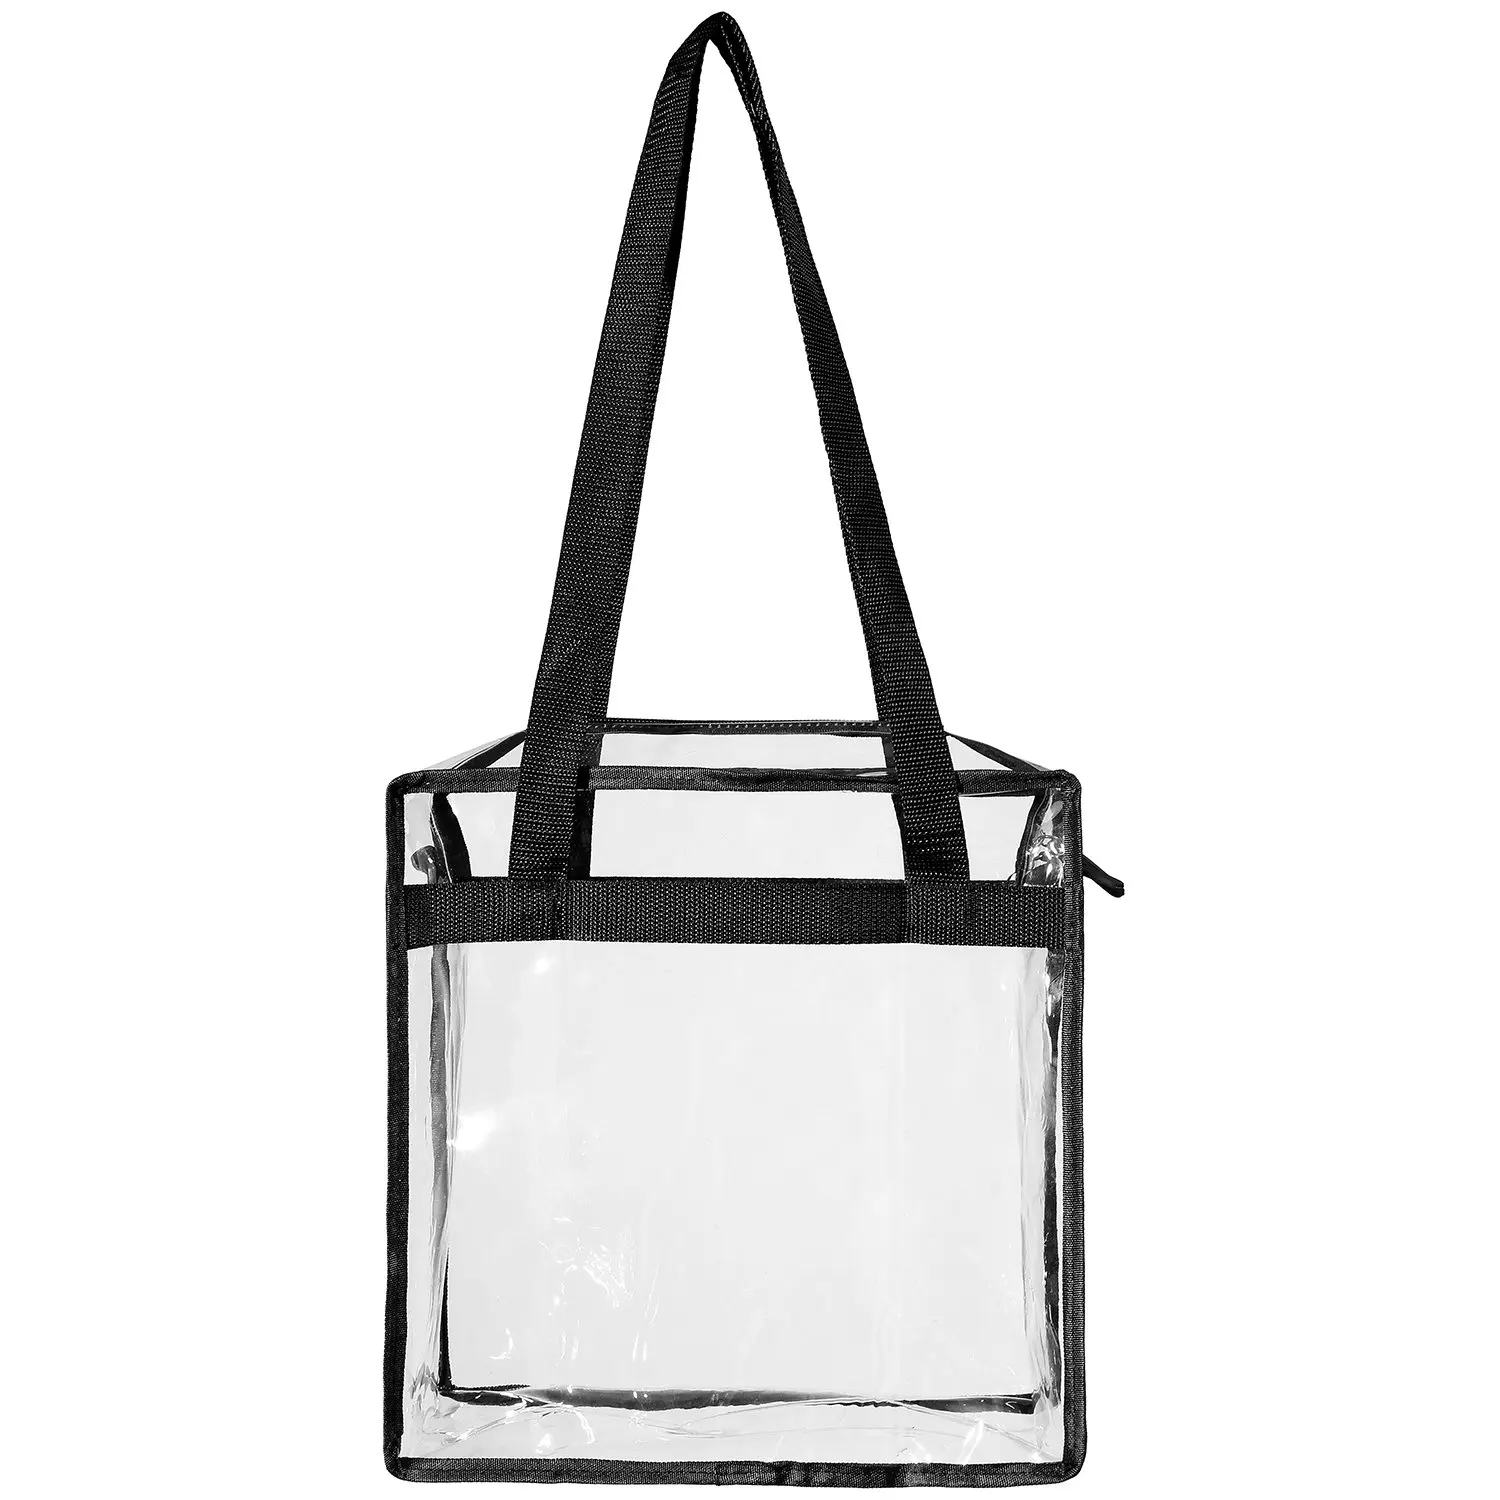 Clear Bags Stadium Approved Clear Tote Bag With Zipper Closure ...